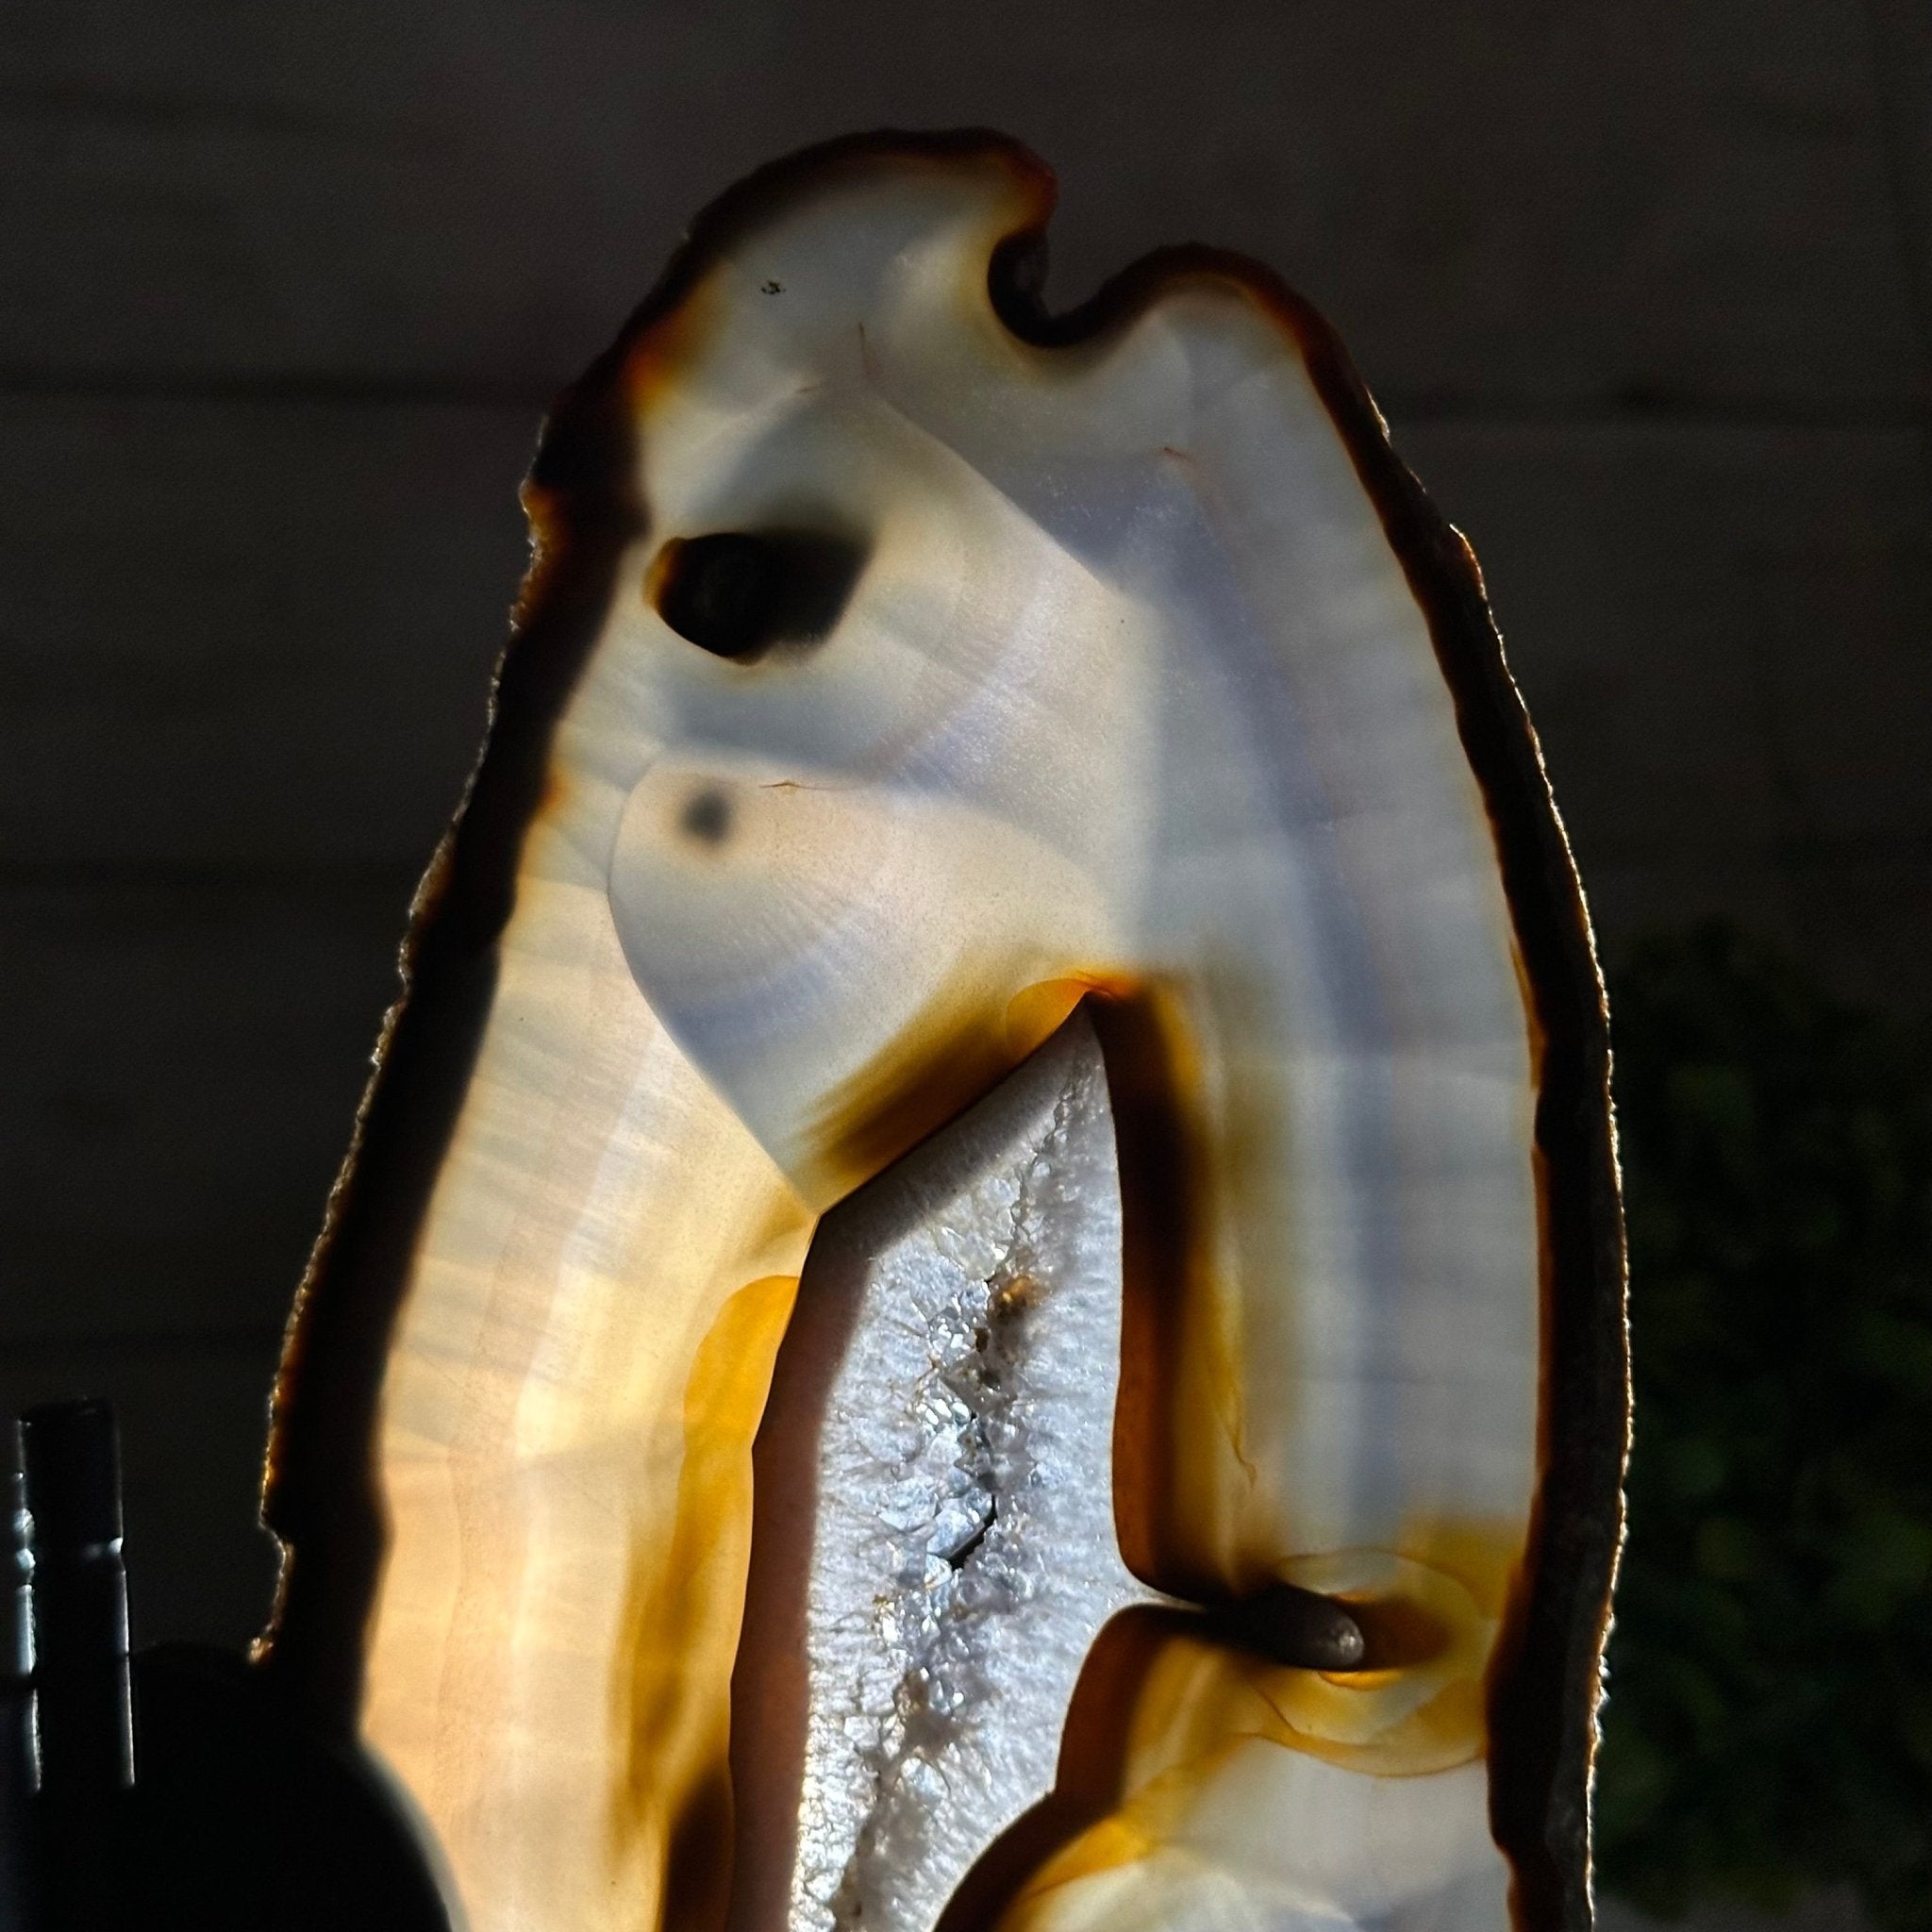 Natural Brazilian Agate "Butterfly Wings", 9.2" Tall #5050NA-151 - Brazil GemsBrazil GemsNatural Brazilian Agate "Butterfly Wings", 9.2" Tall #5050NA-151Agate Butterfly Wings5050NA-151